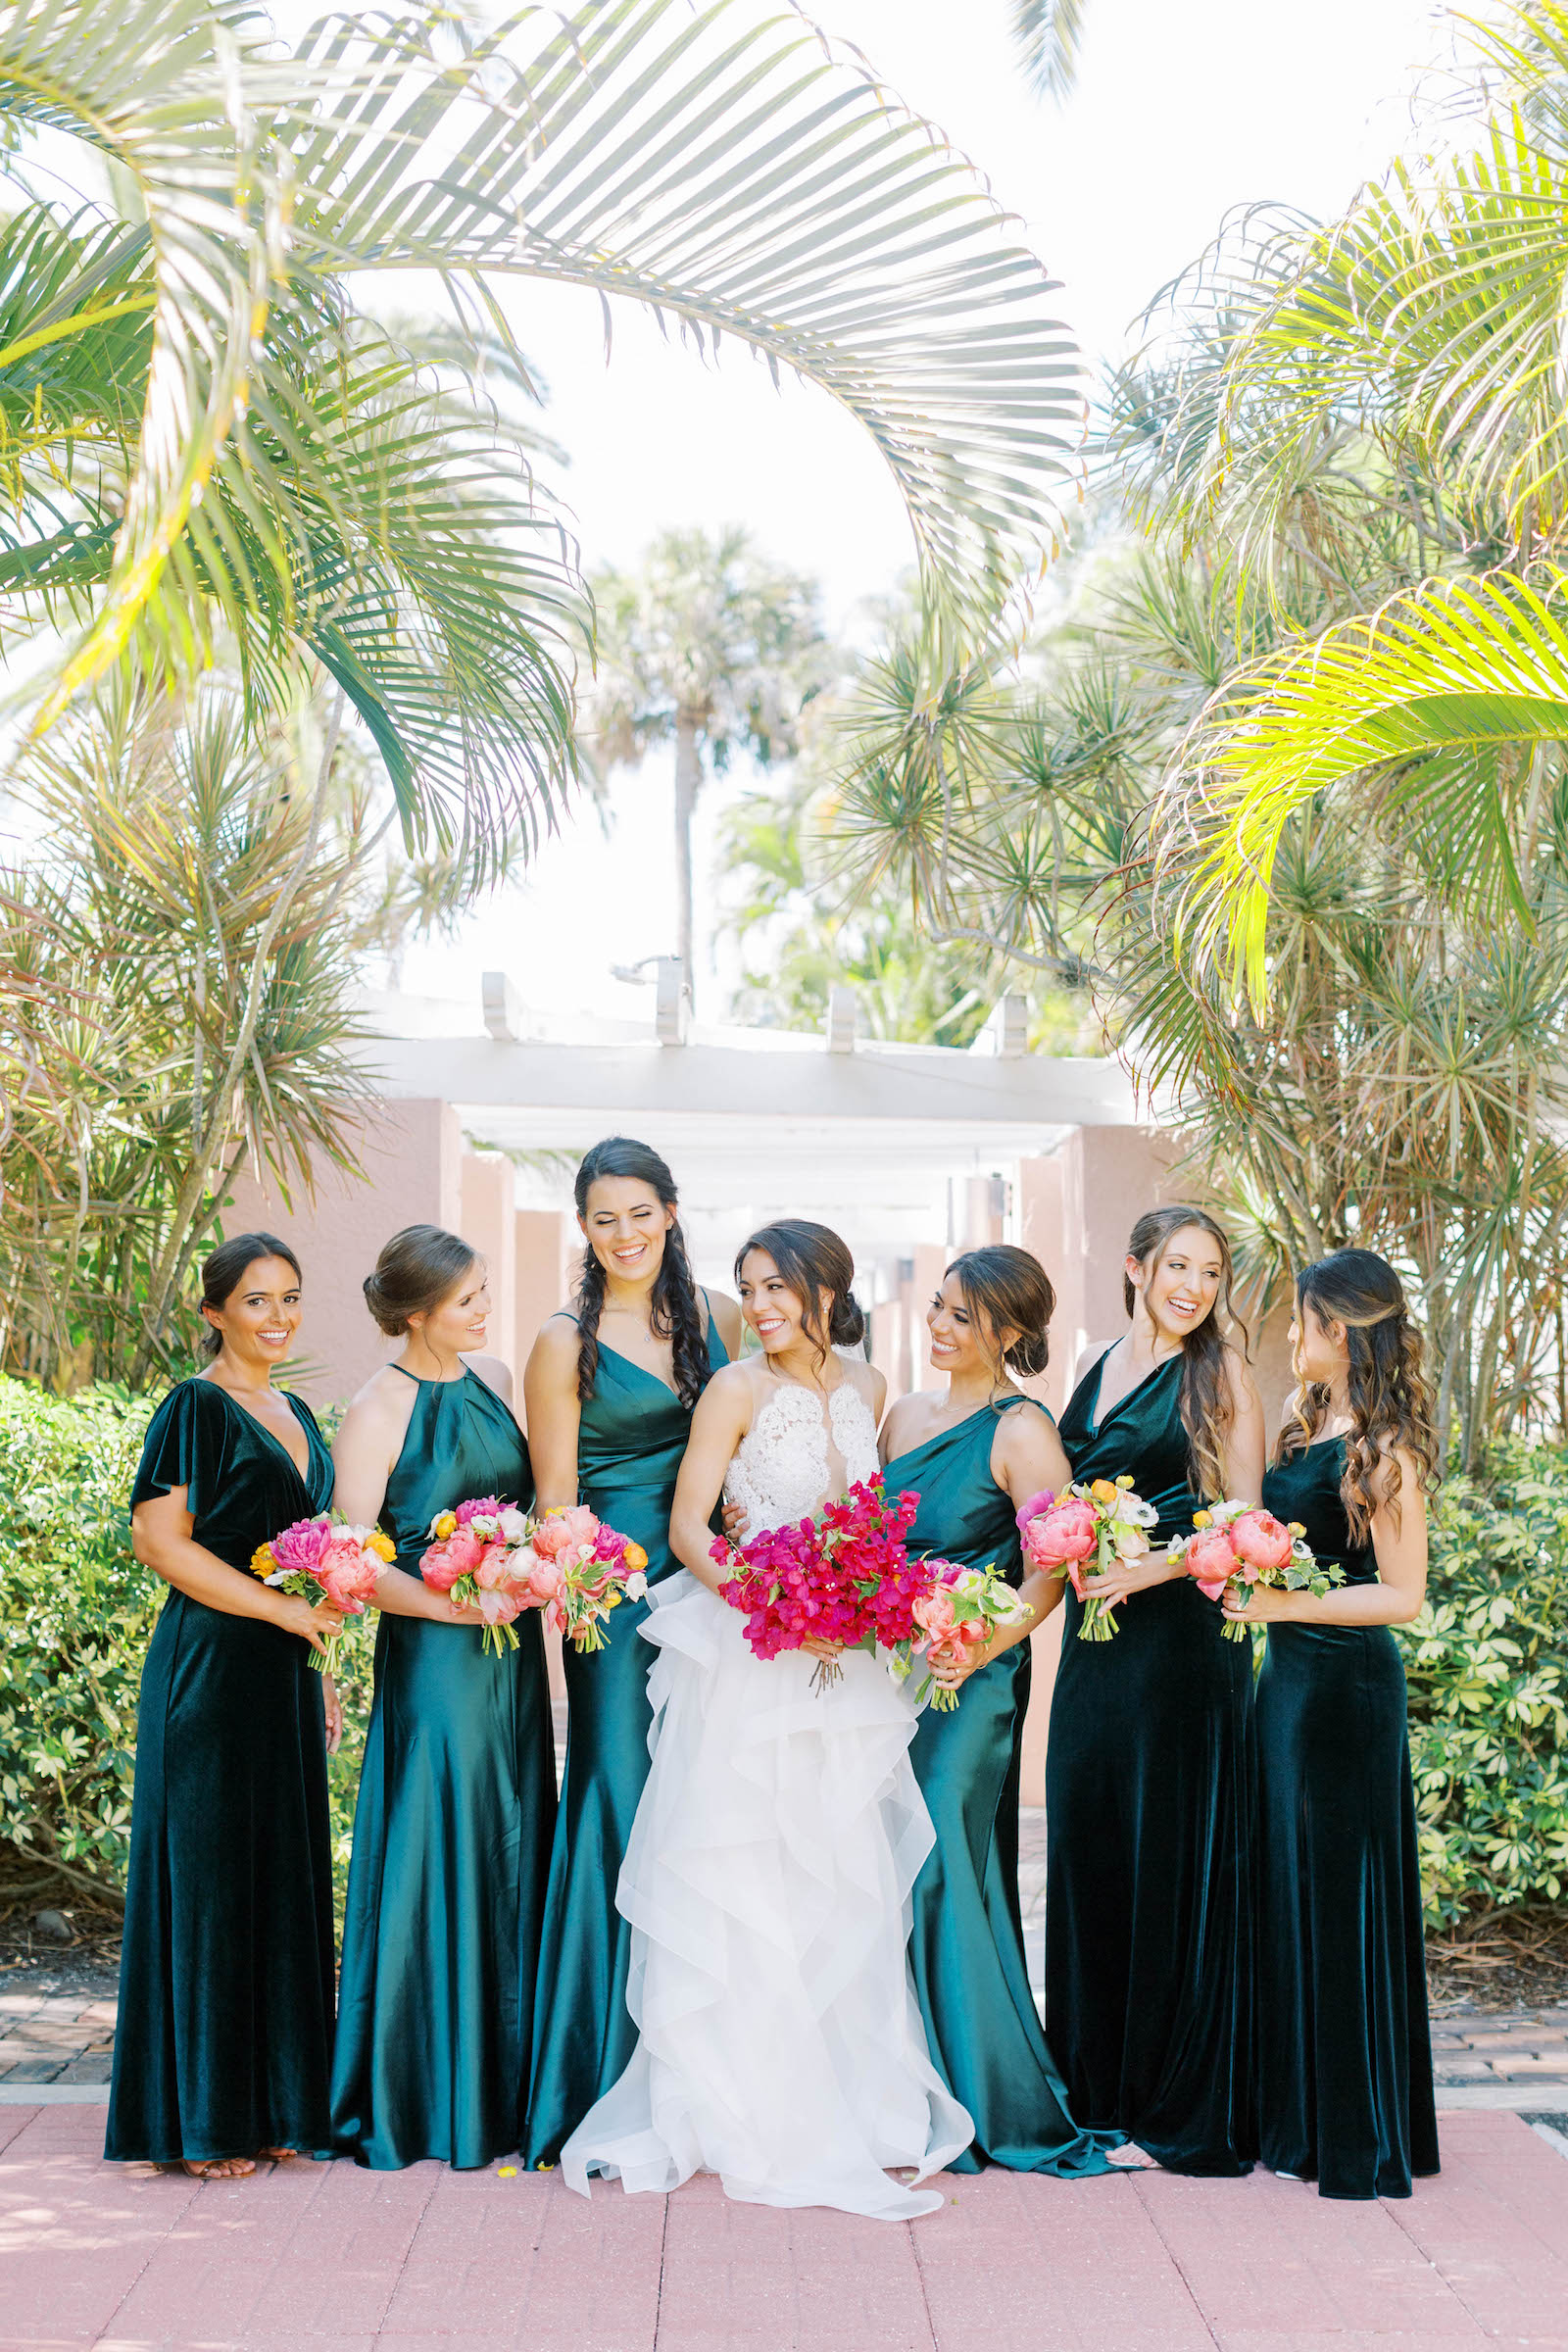 Bride with Bridesmaids in Emerald Green Mix and Match Floor Length Satin and Velvet Dresses with Hot Pink Flower Bouquets